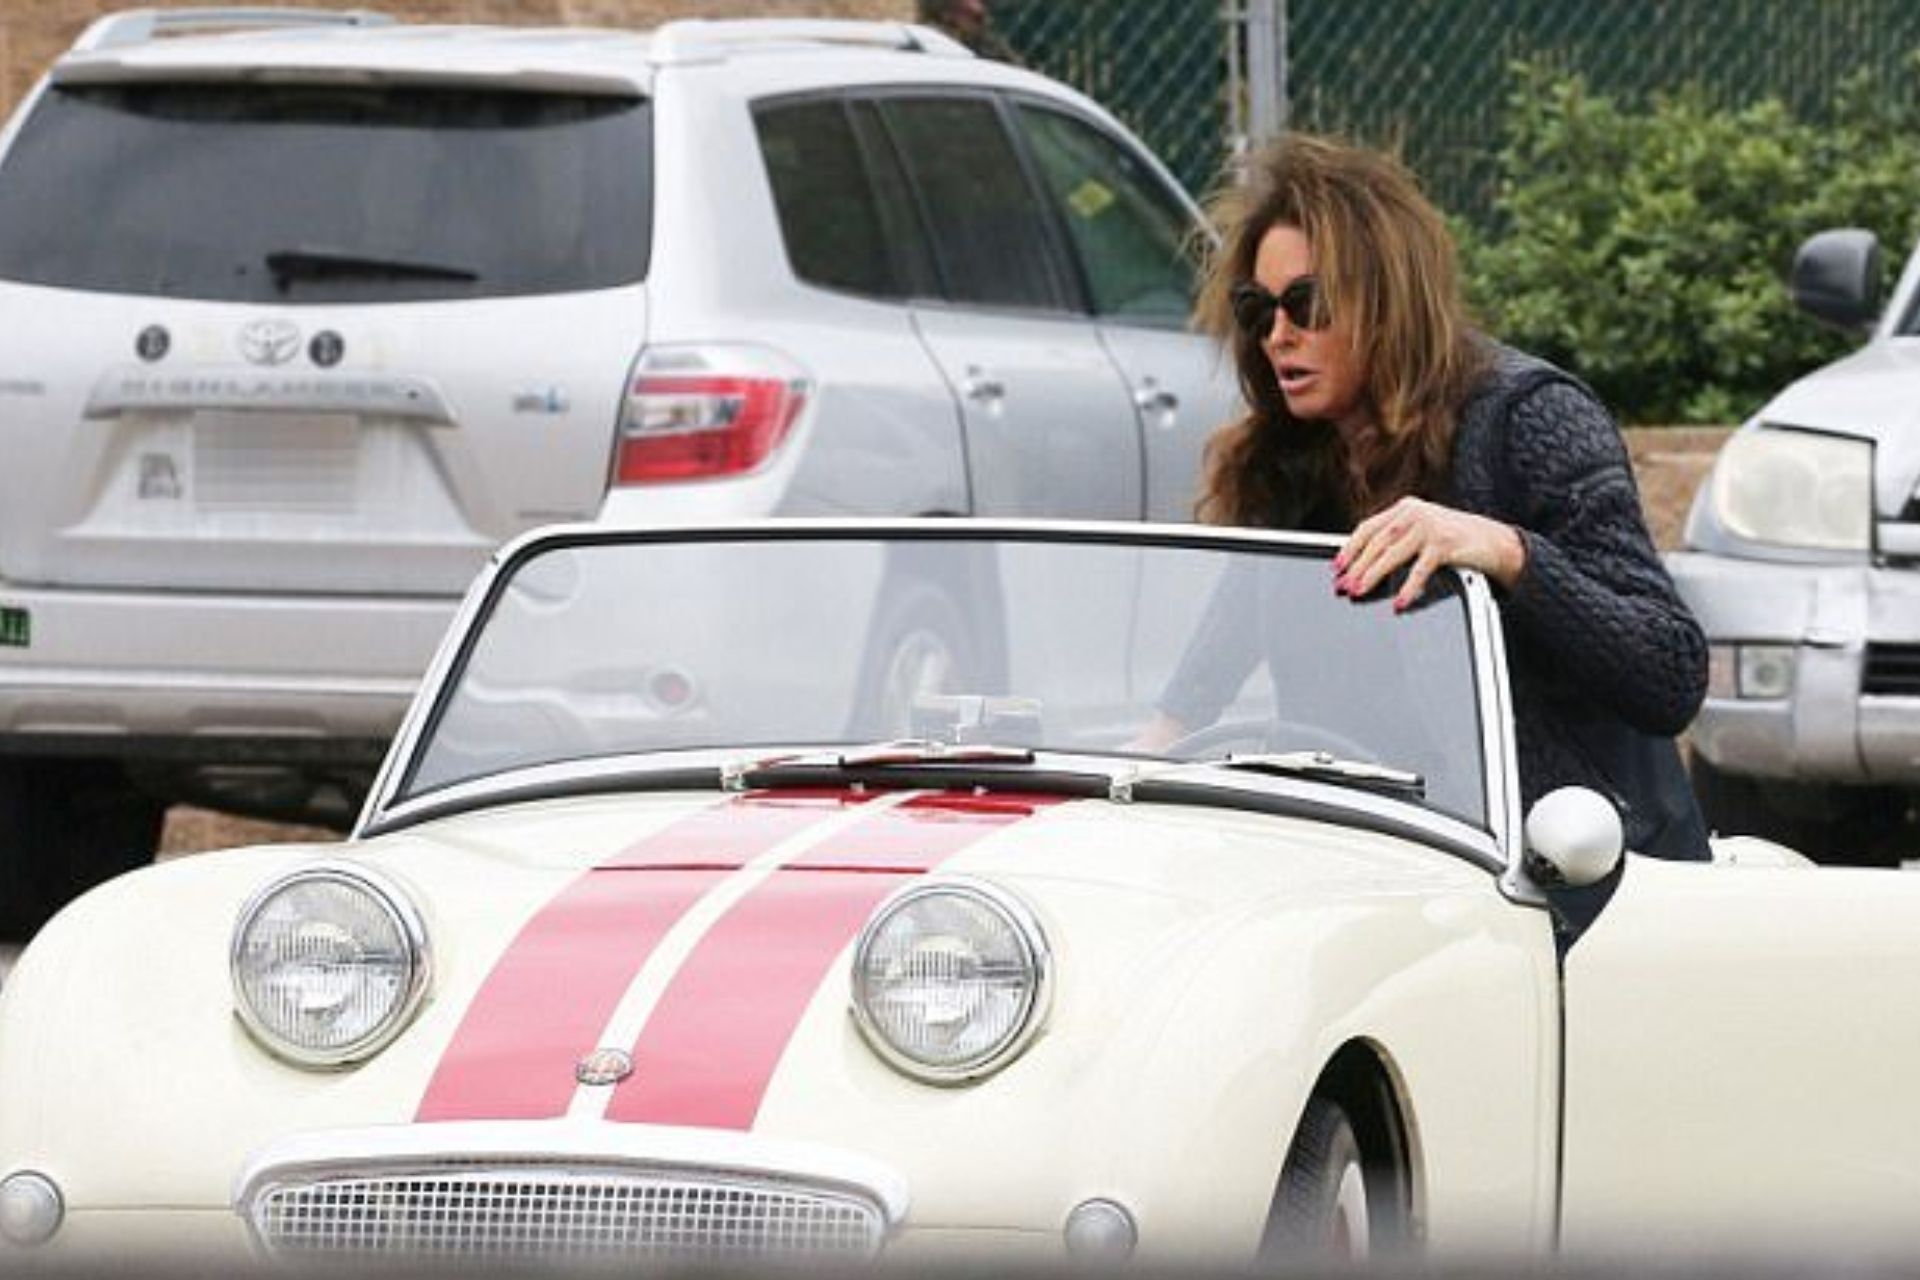 caitlyn jenner wears sunglasses while hopping in her car, ready to drive through malibu area